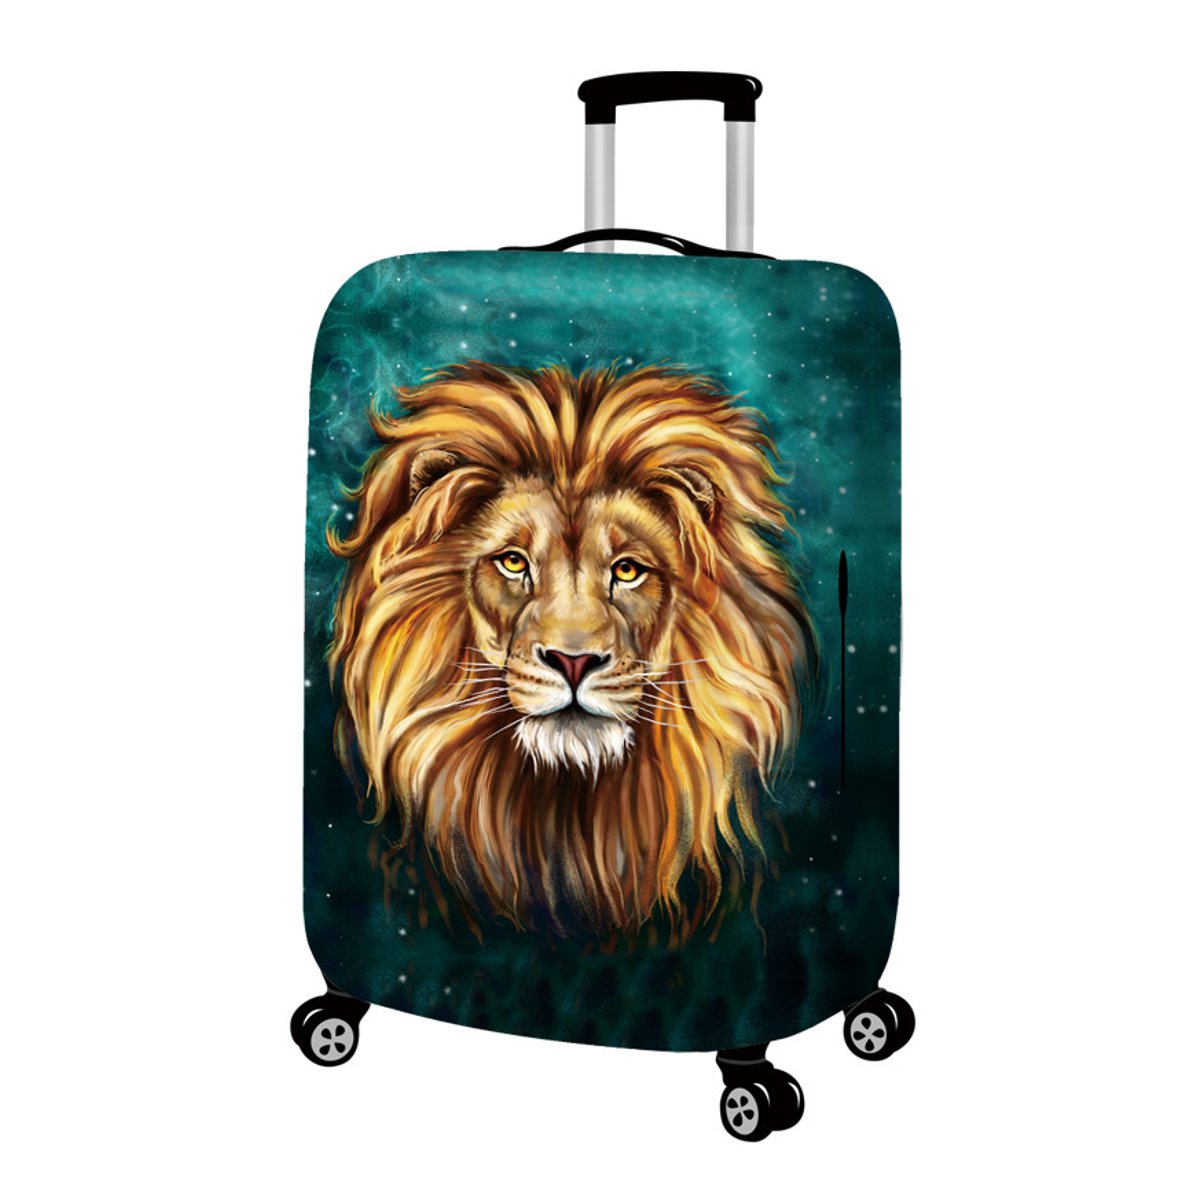 18-32inch Polyester Luggage Bag Cover Lion Travel Elastic Suitcase Cover Dust Proof Protective 7